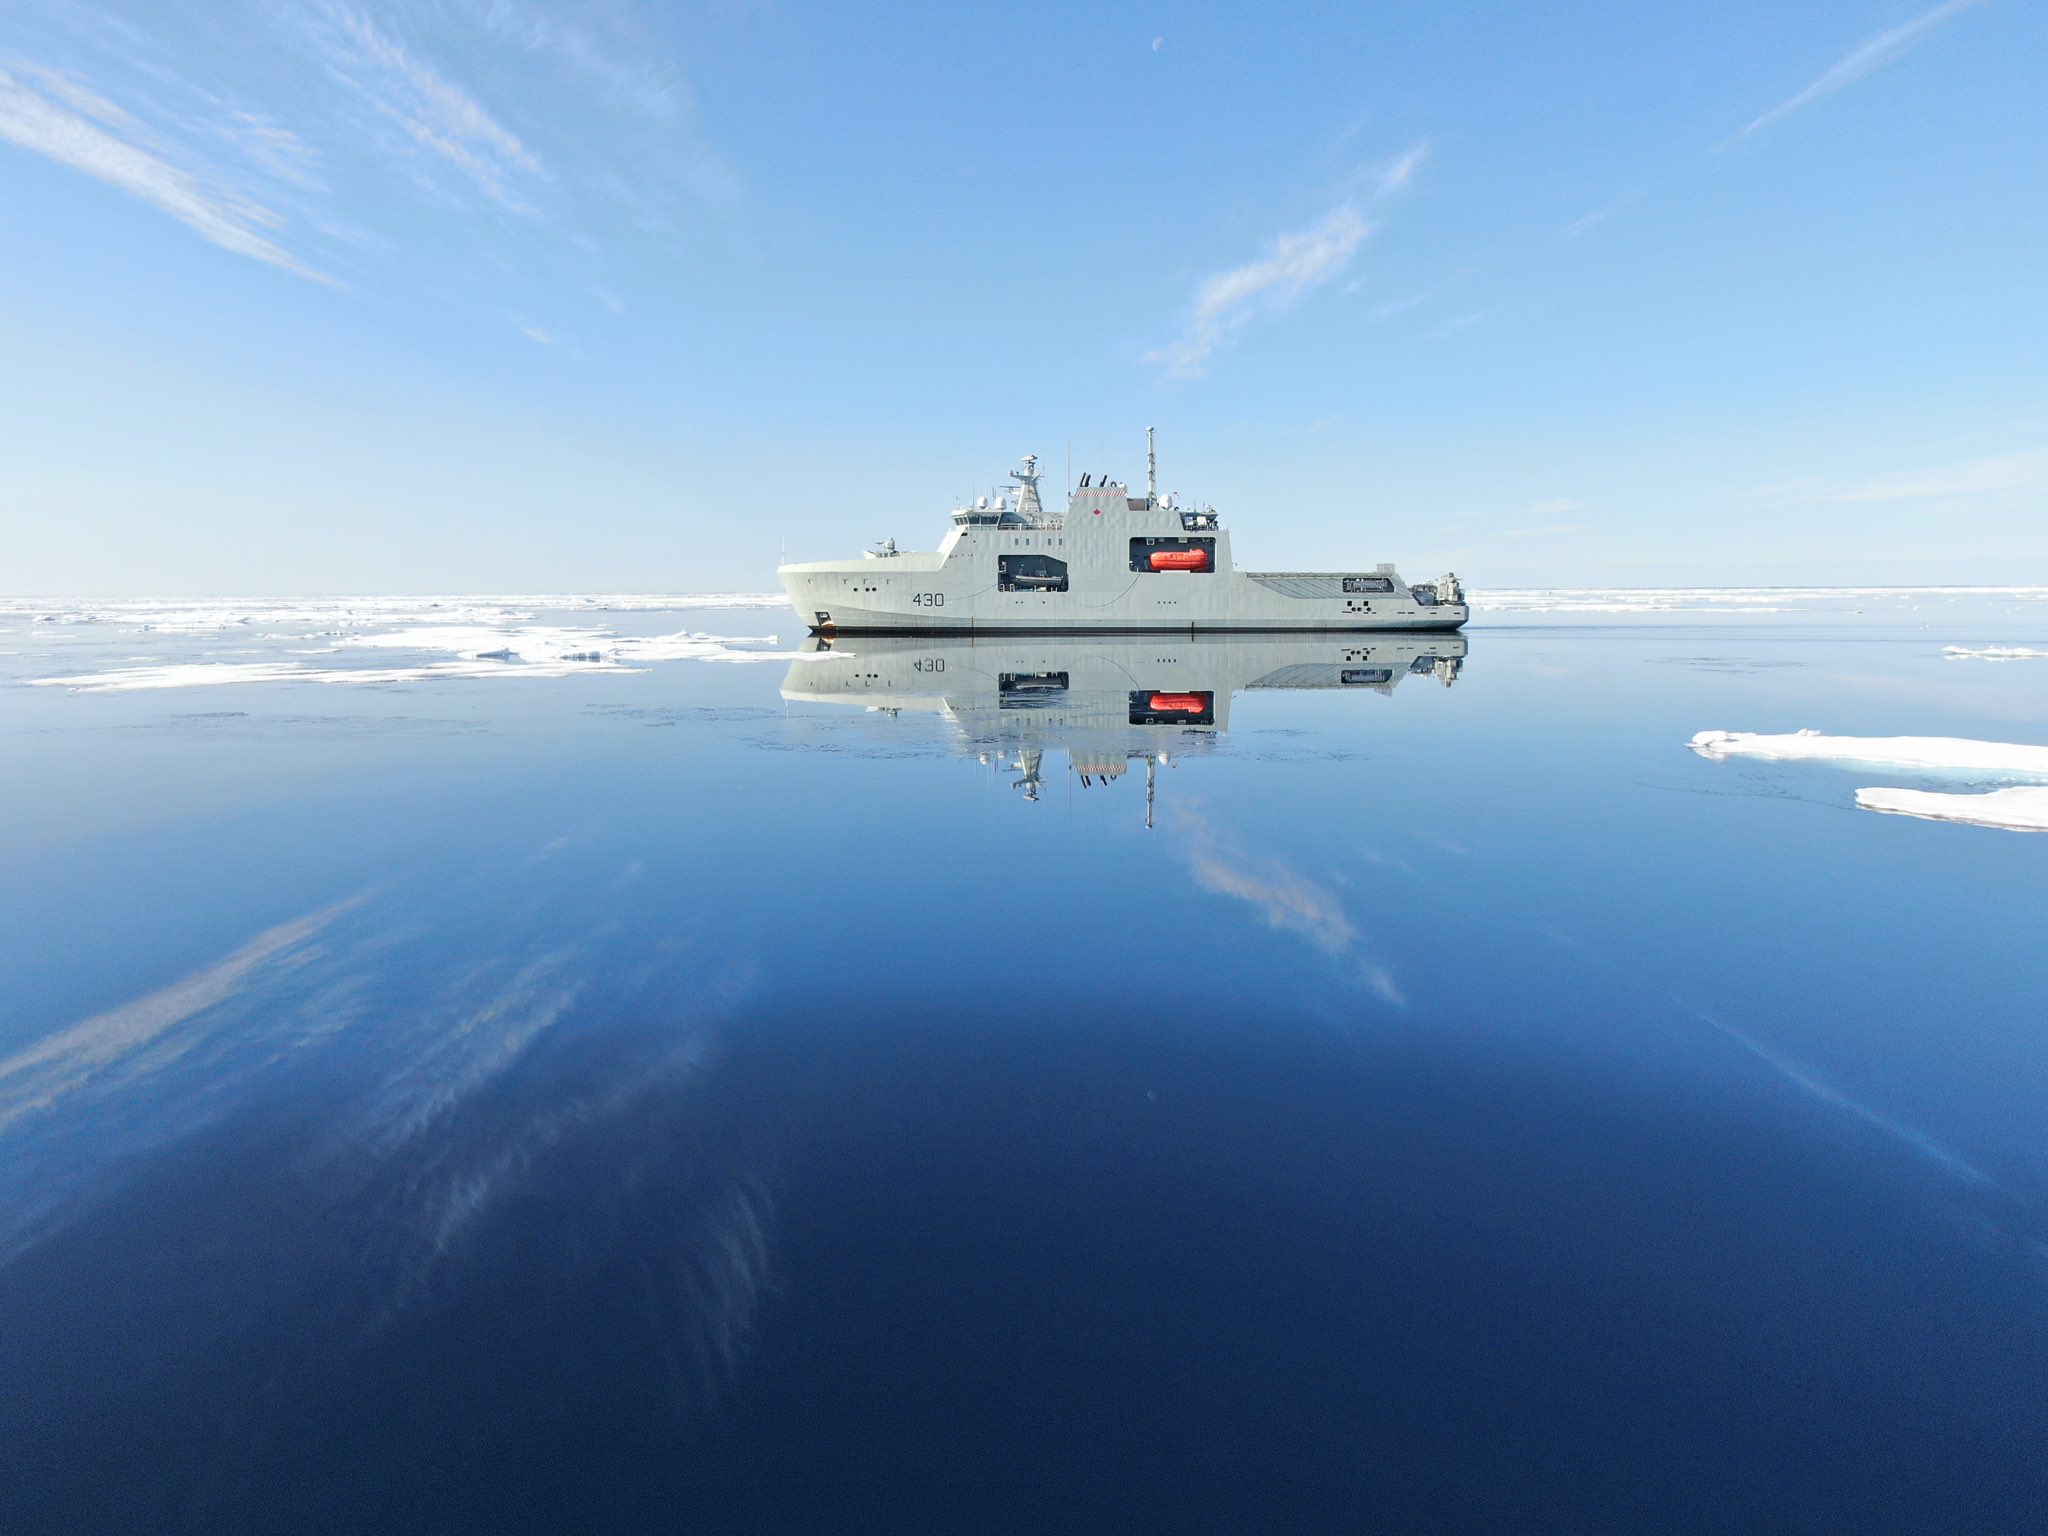 HMCS Harry DeWolf is reflected in the icy Arctic water. Harry DeWolf sailed through the Arctic earlier this year as part of its six-month circumnavigation of North America.